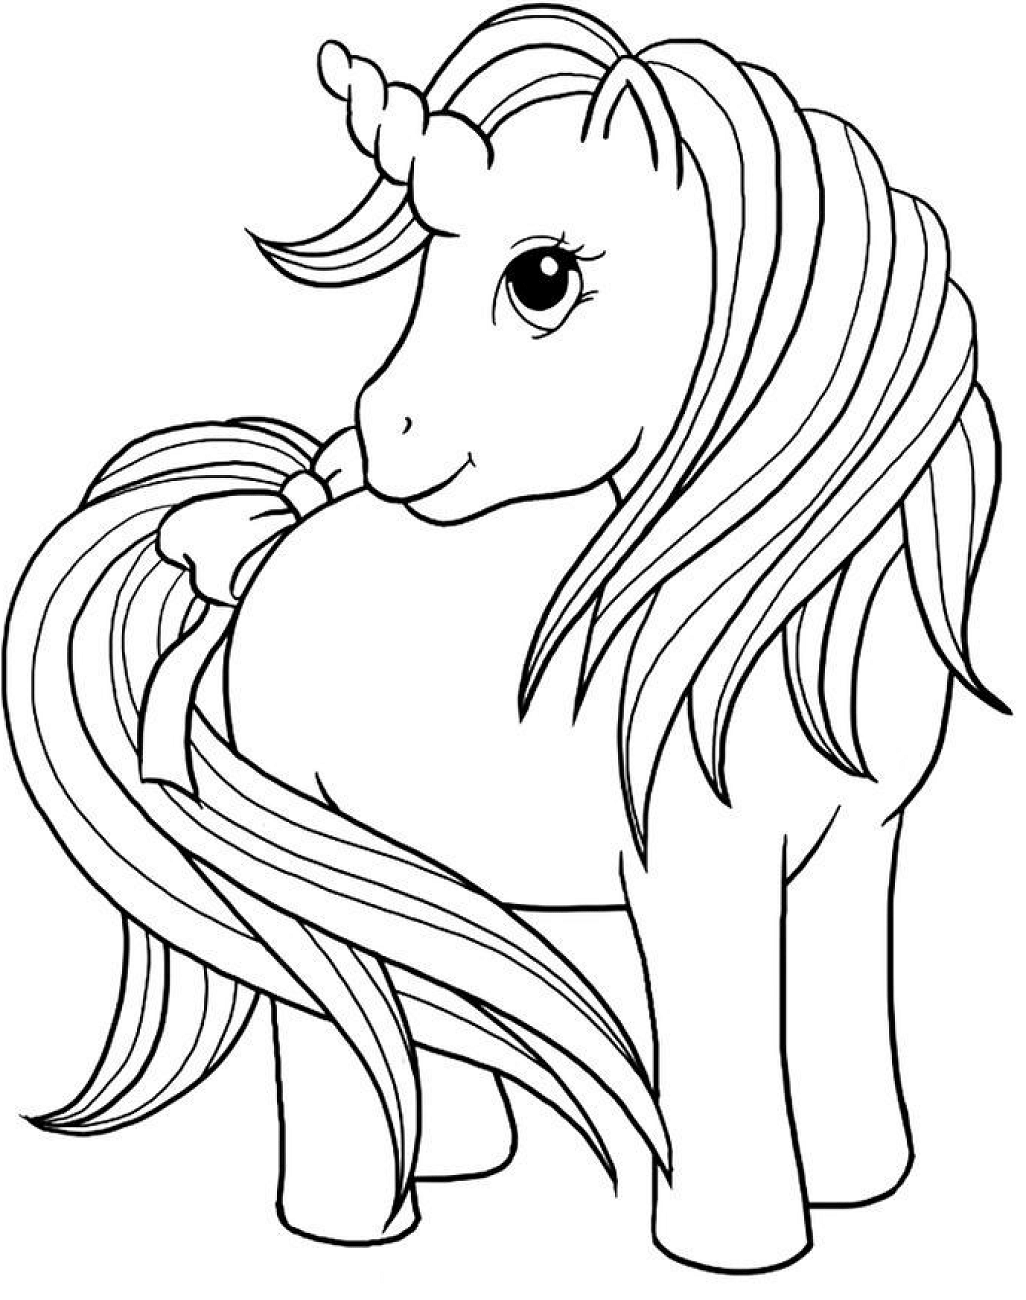 Printable Unicorn Coloring Pages Free Printable Templates